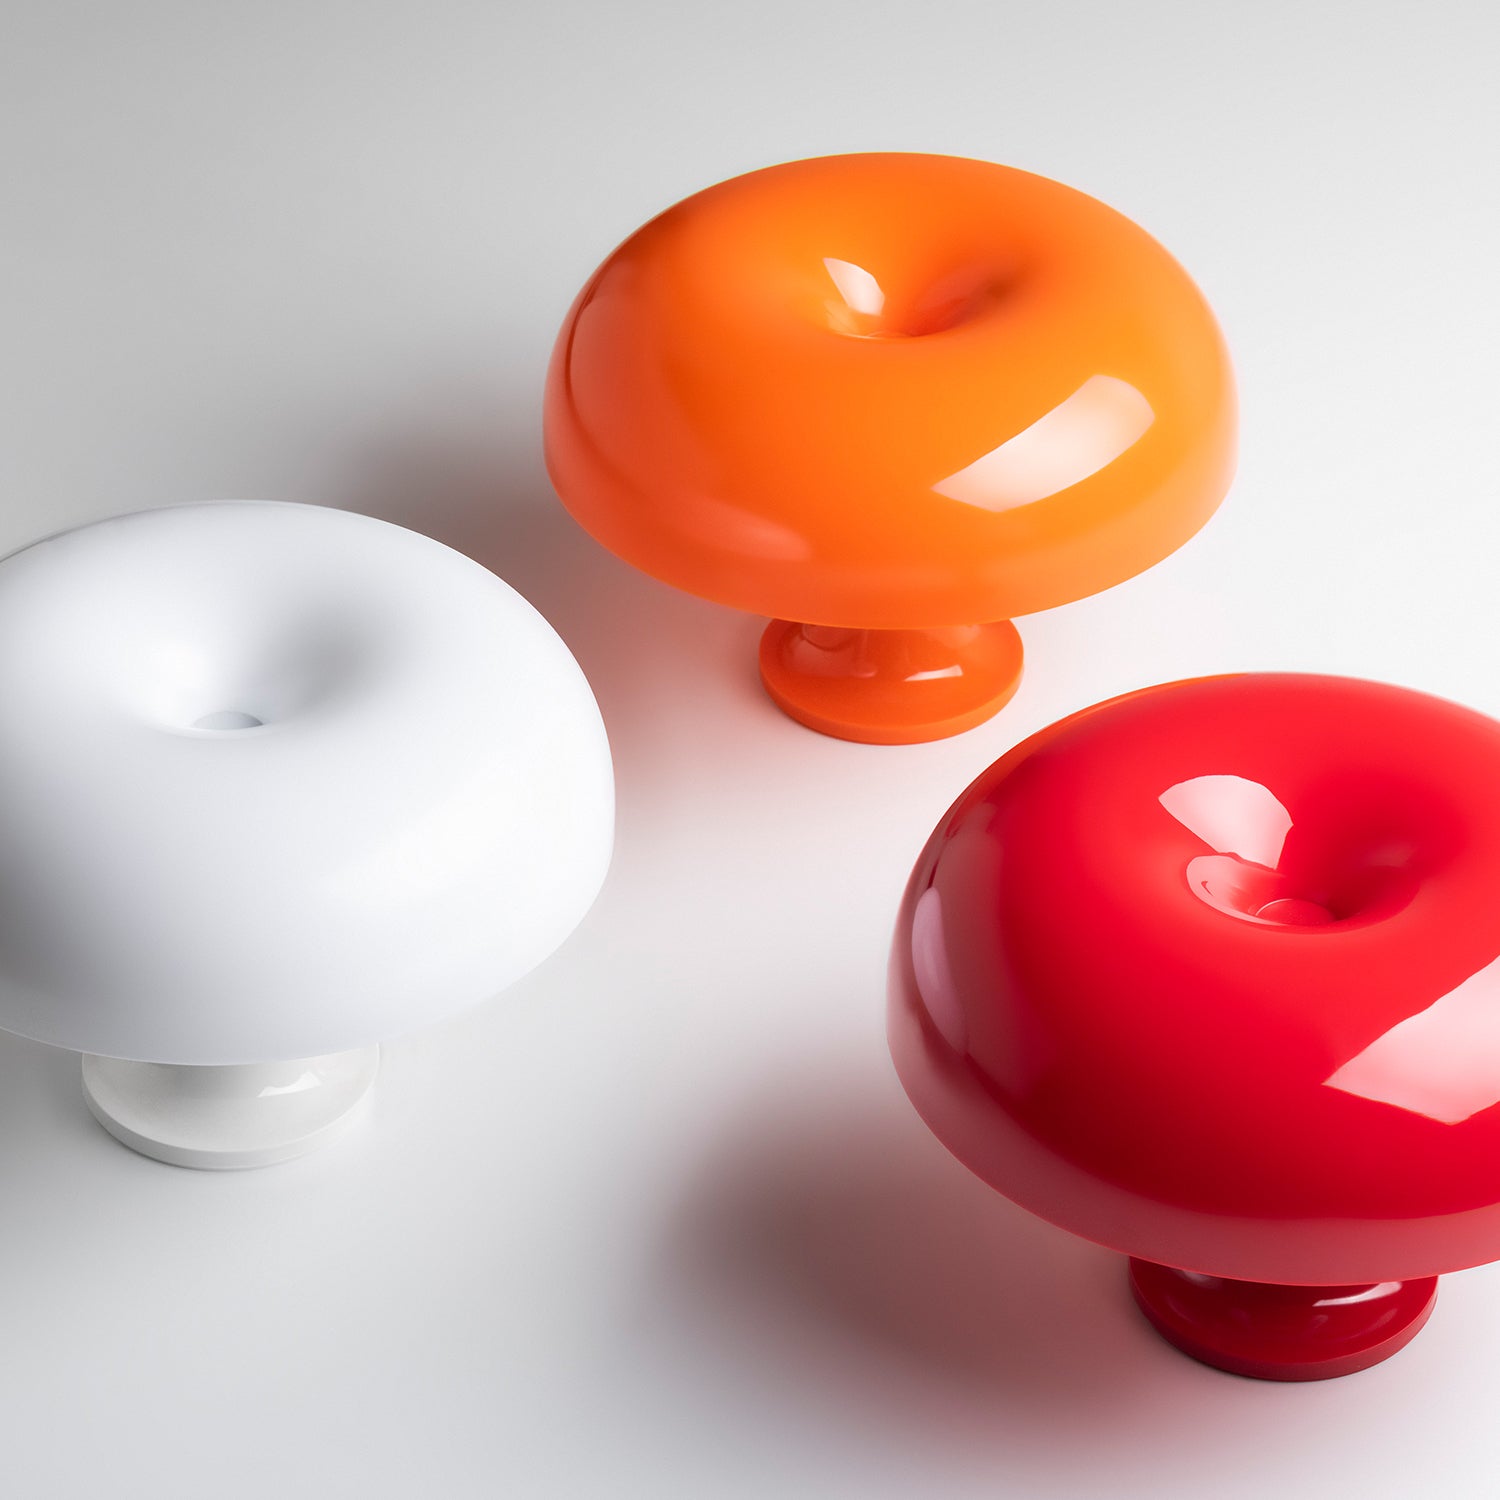 Artemide Nessino Table Lamps, showing red, orange & white